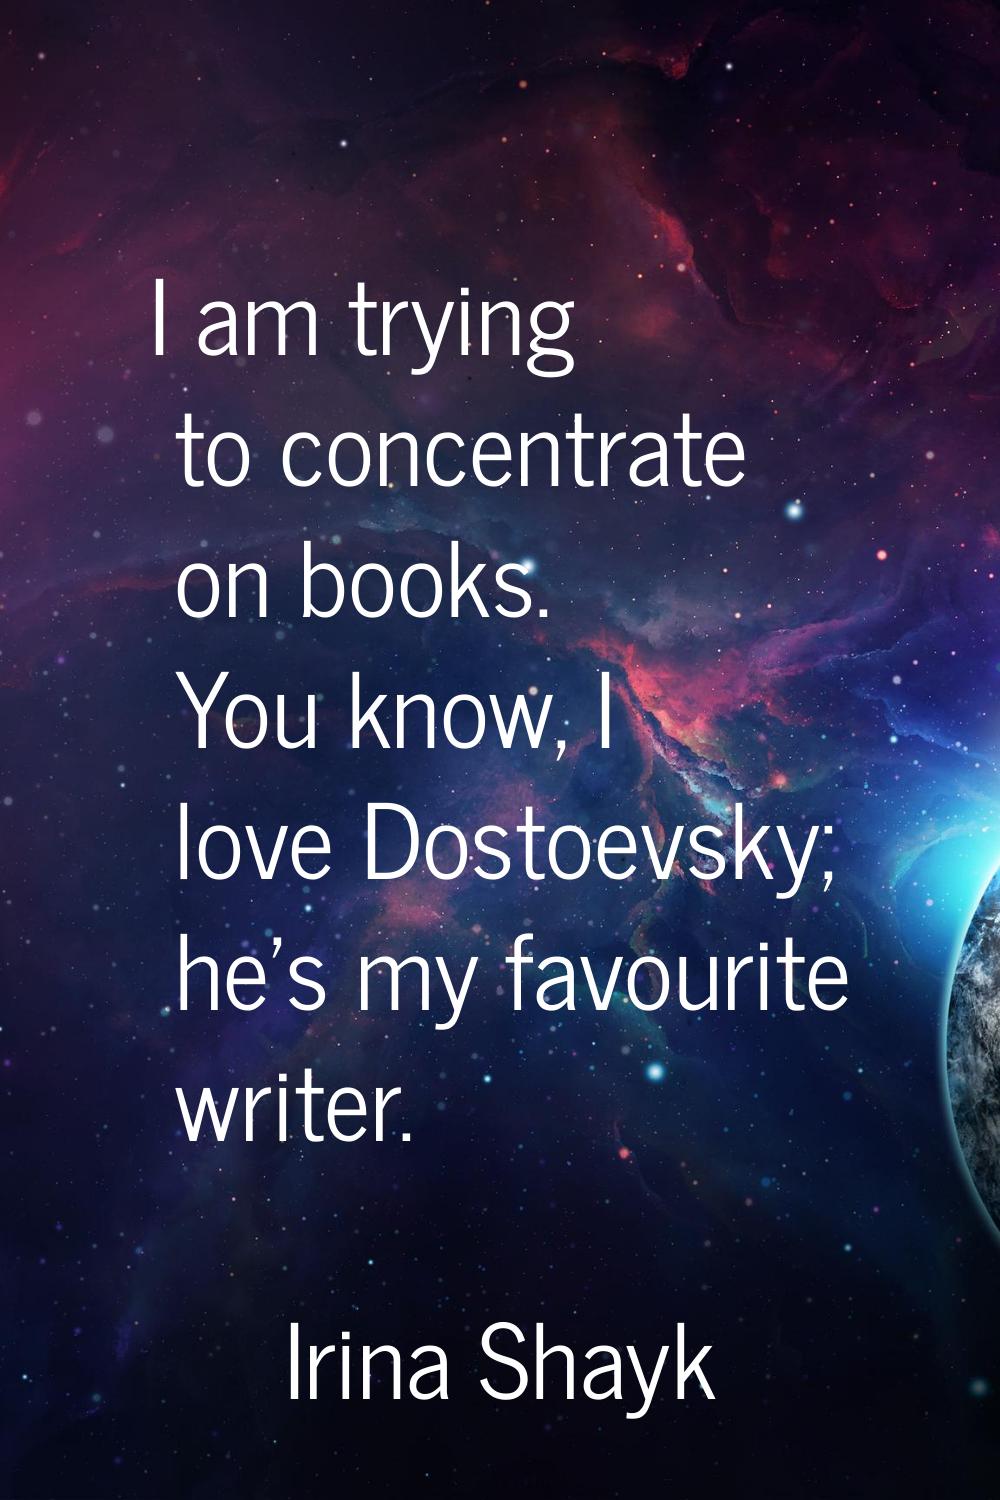 I am trying to concentrate on books. You know, I love Dostoevsky; he's my favourite writer.